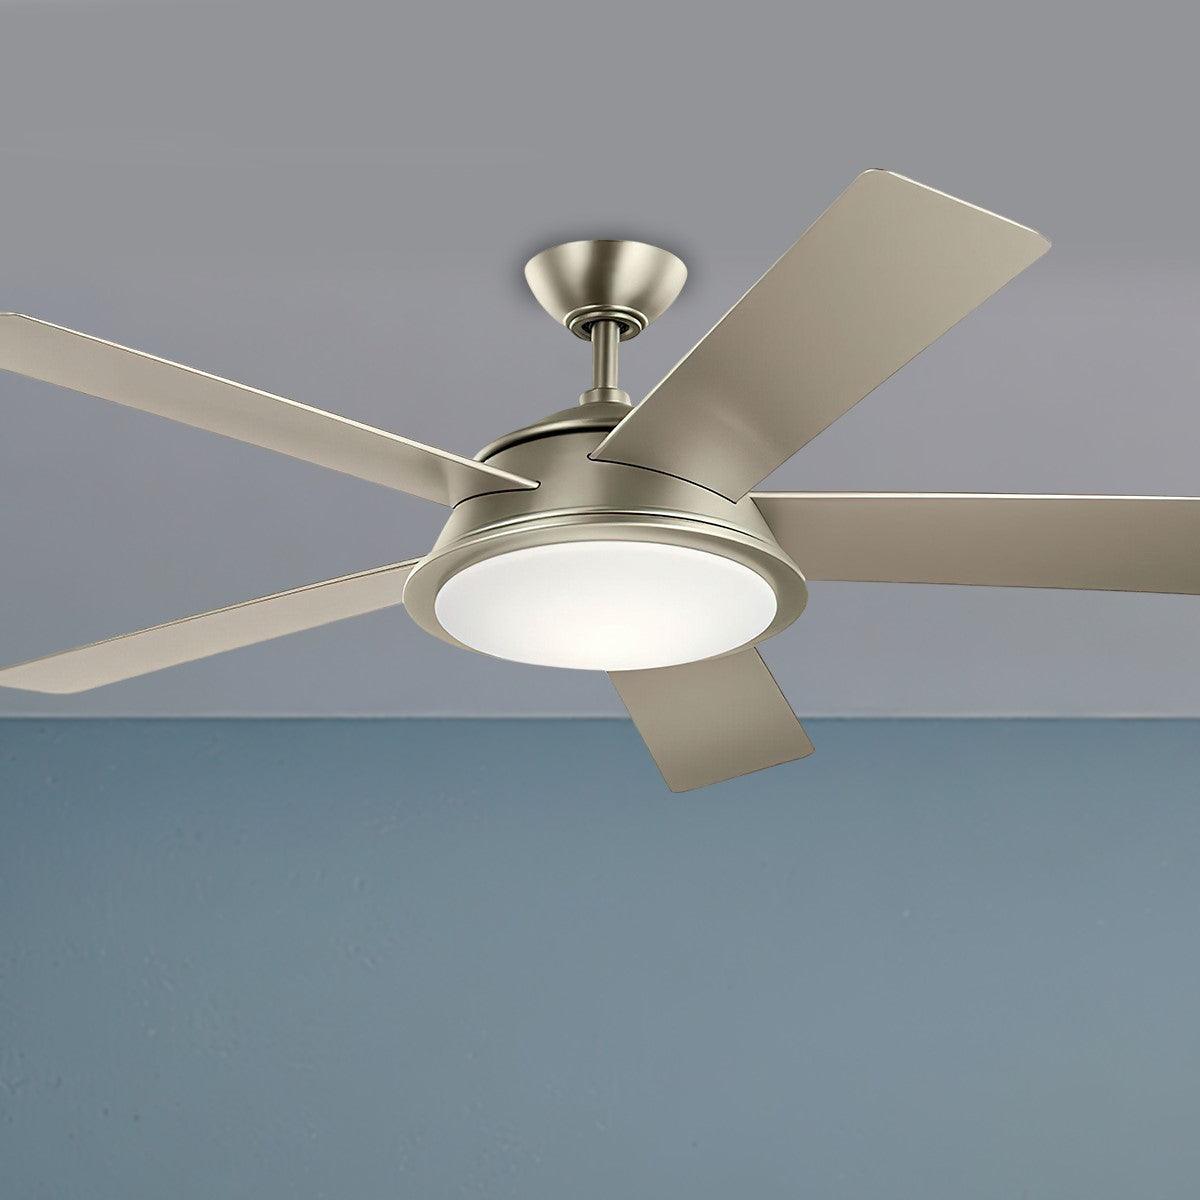 Verdi 56 Inch Coastal Indoor/Outdoor Ceiling Fan With Light And Remote